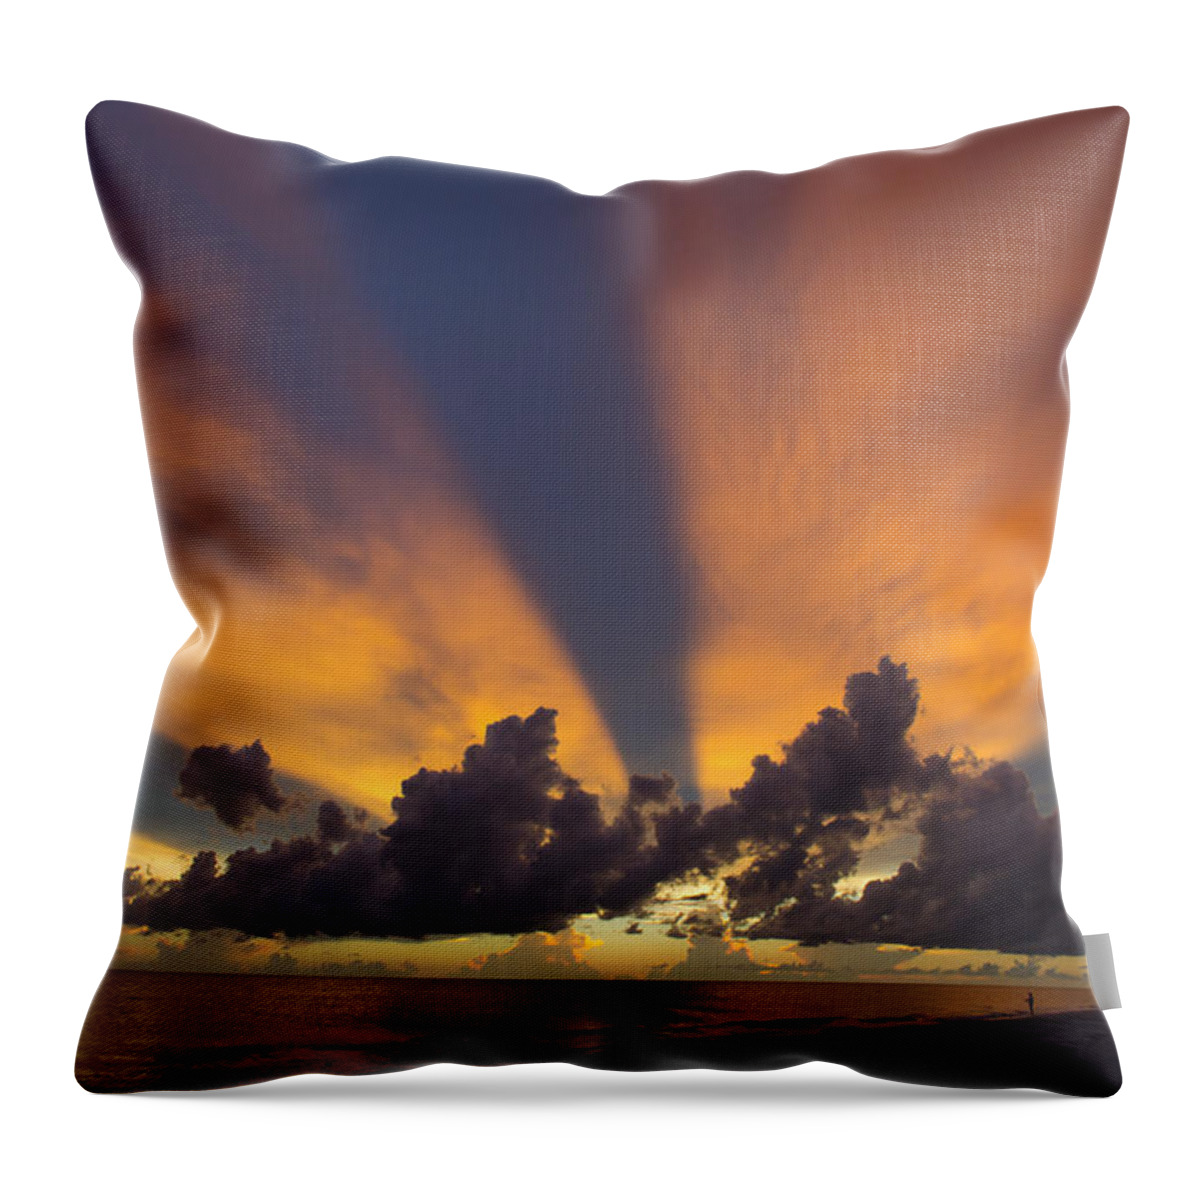 Sunset Throw Pillow featuring the photograph Soulful by Melanie Moraga